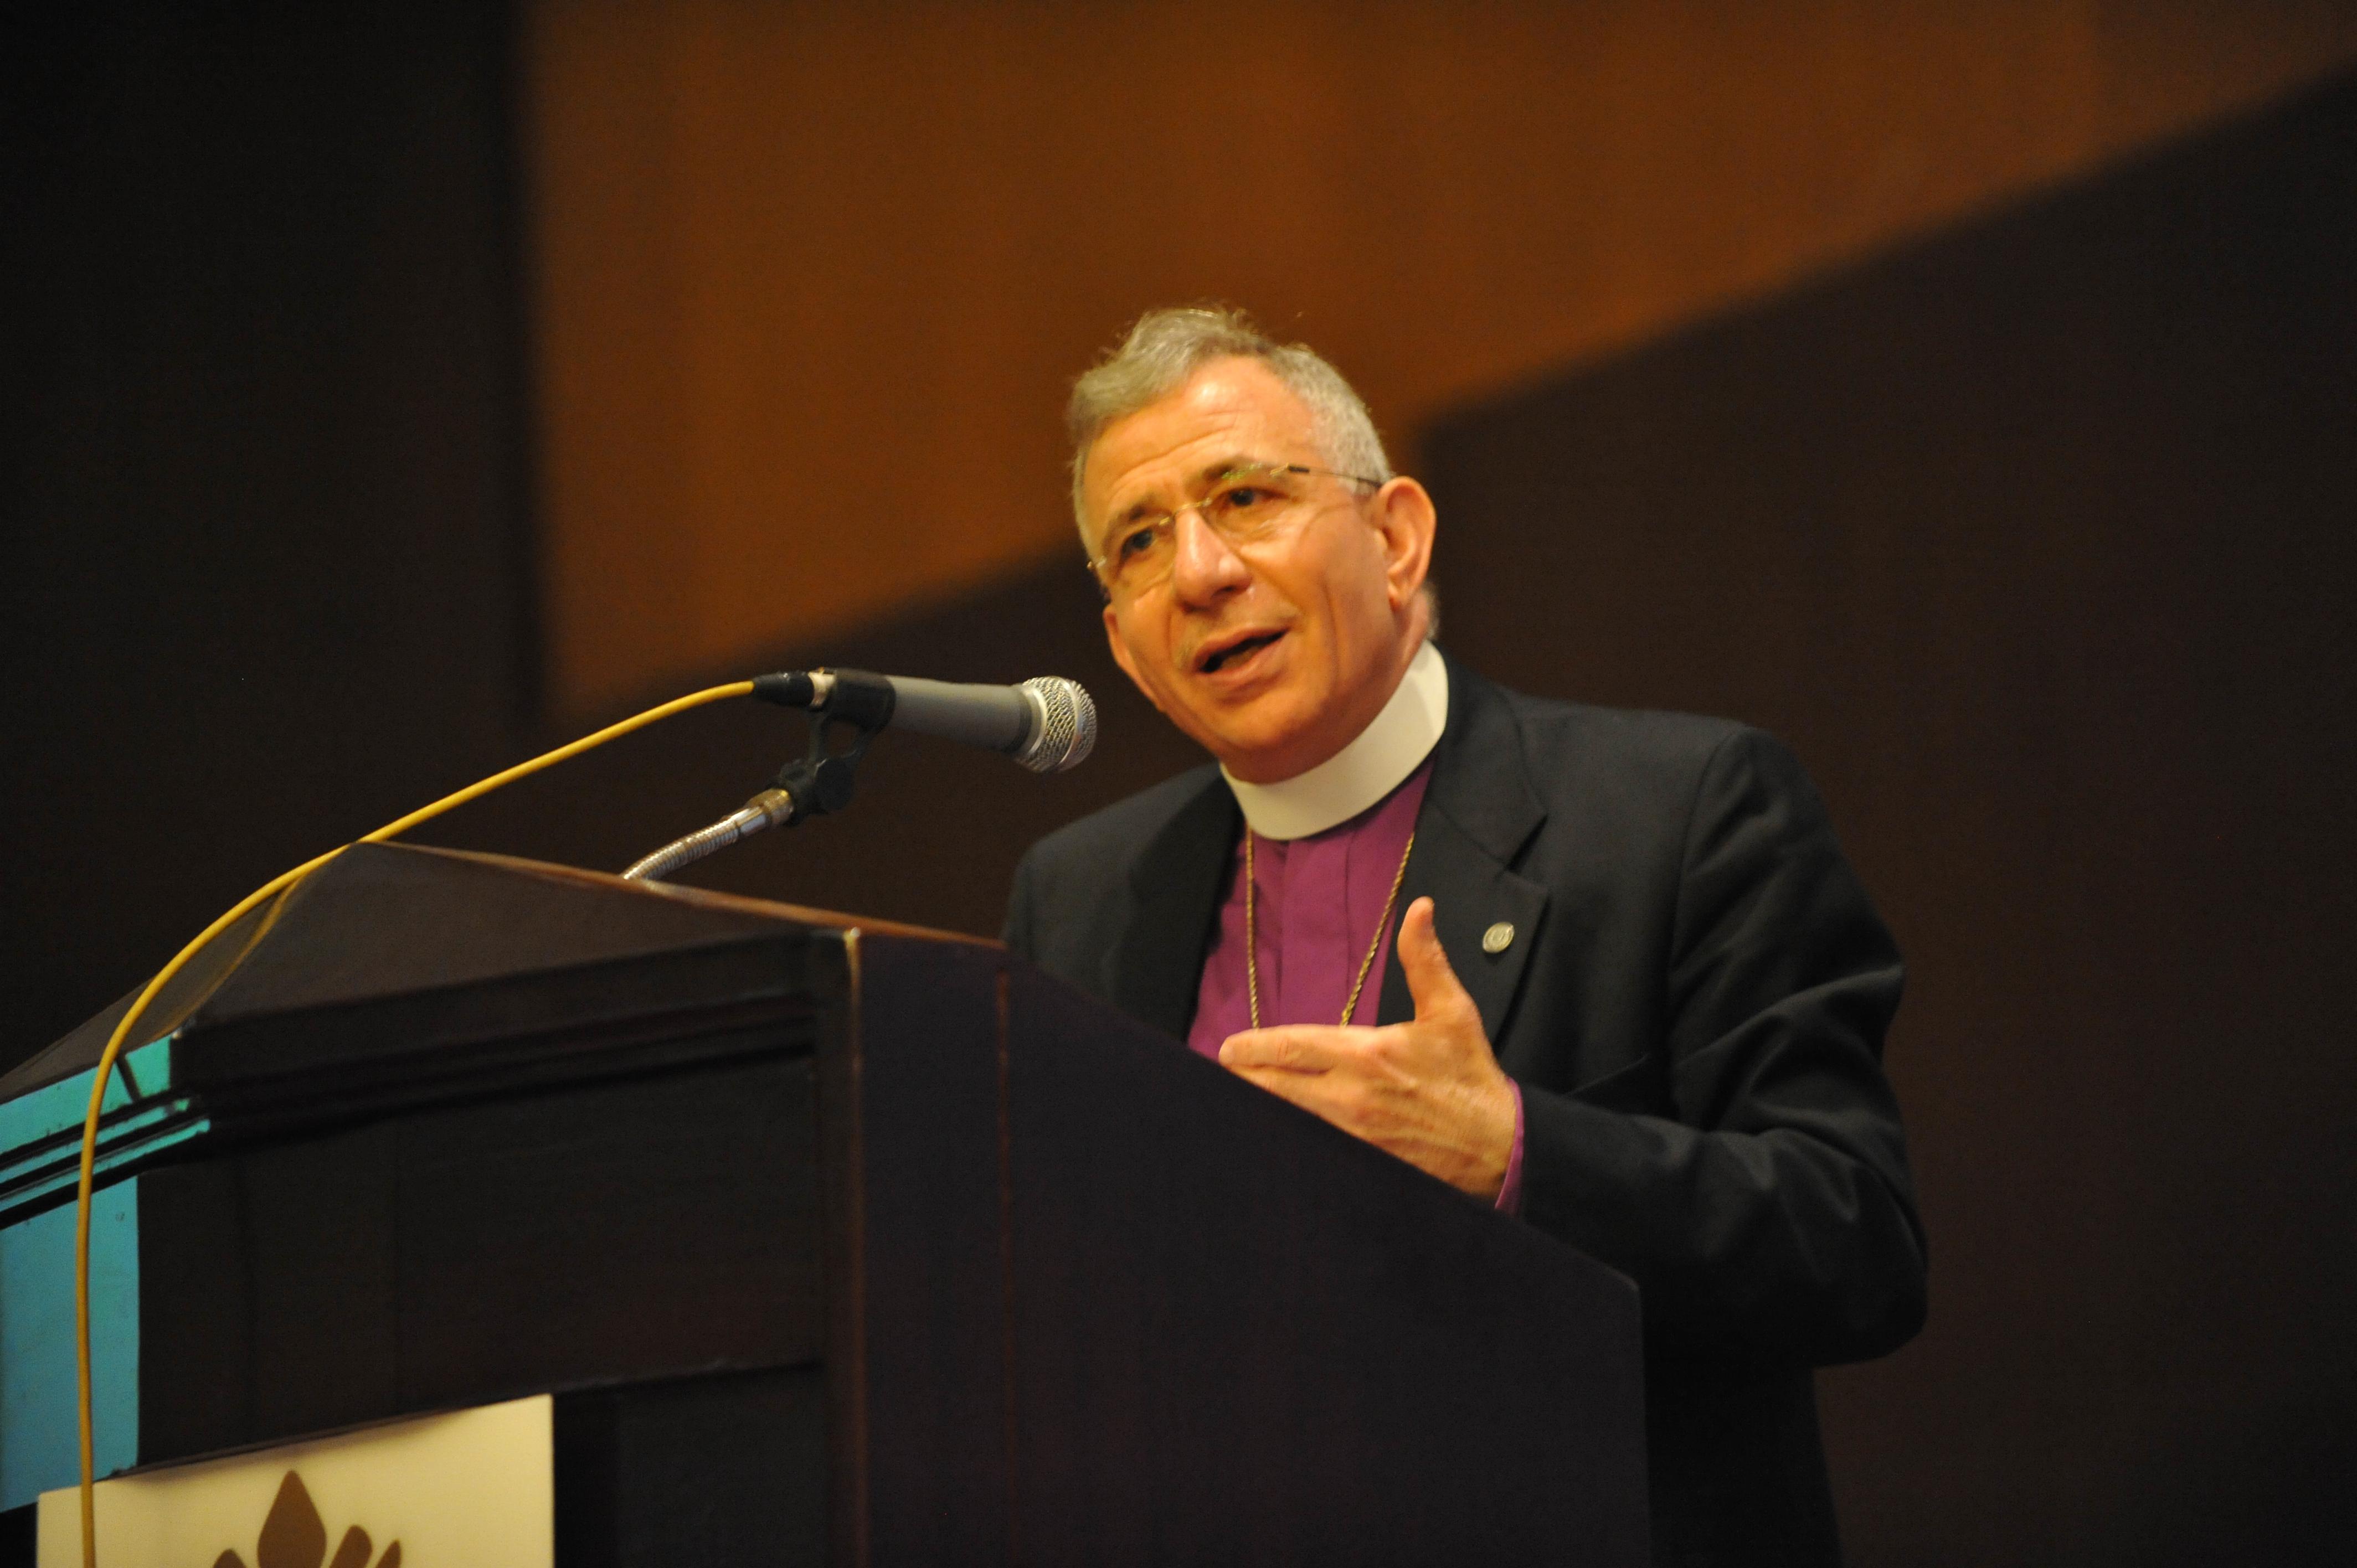 LWF President Bishop Dr Munib Younan delivers his address at the 2014 Council meeting. Photo: M. Renaux